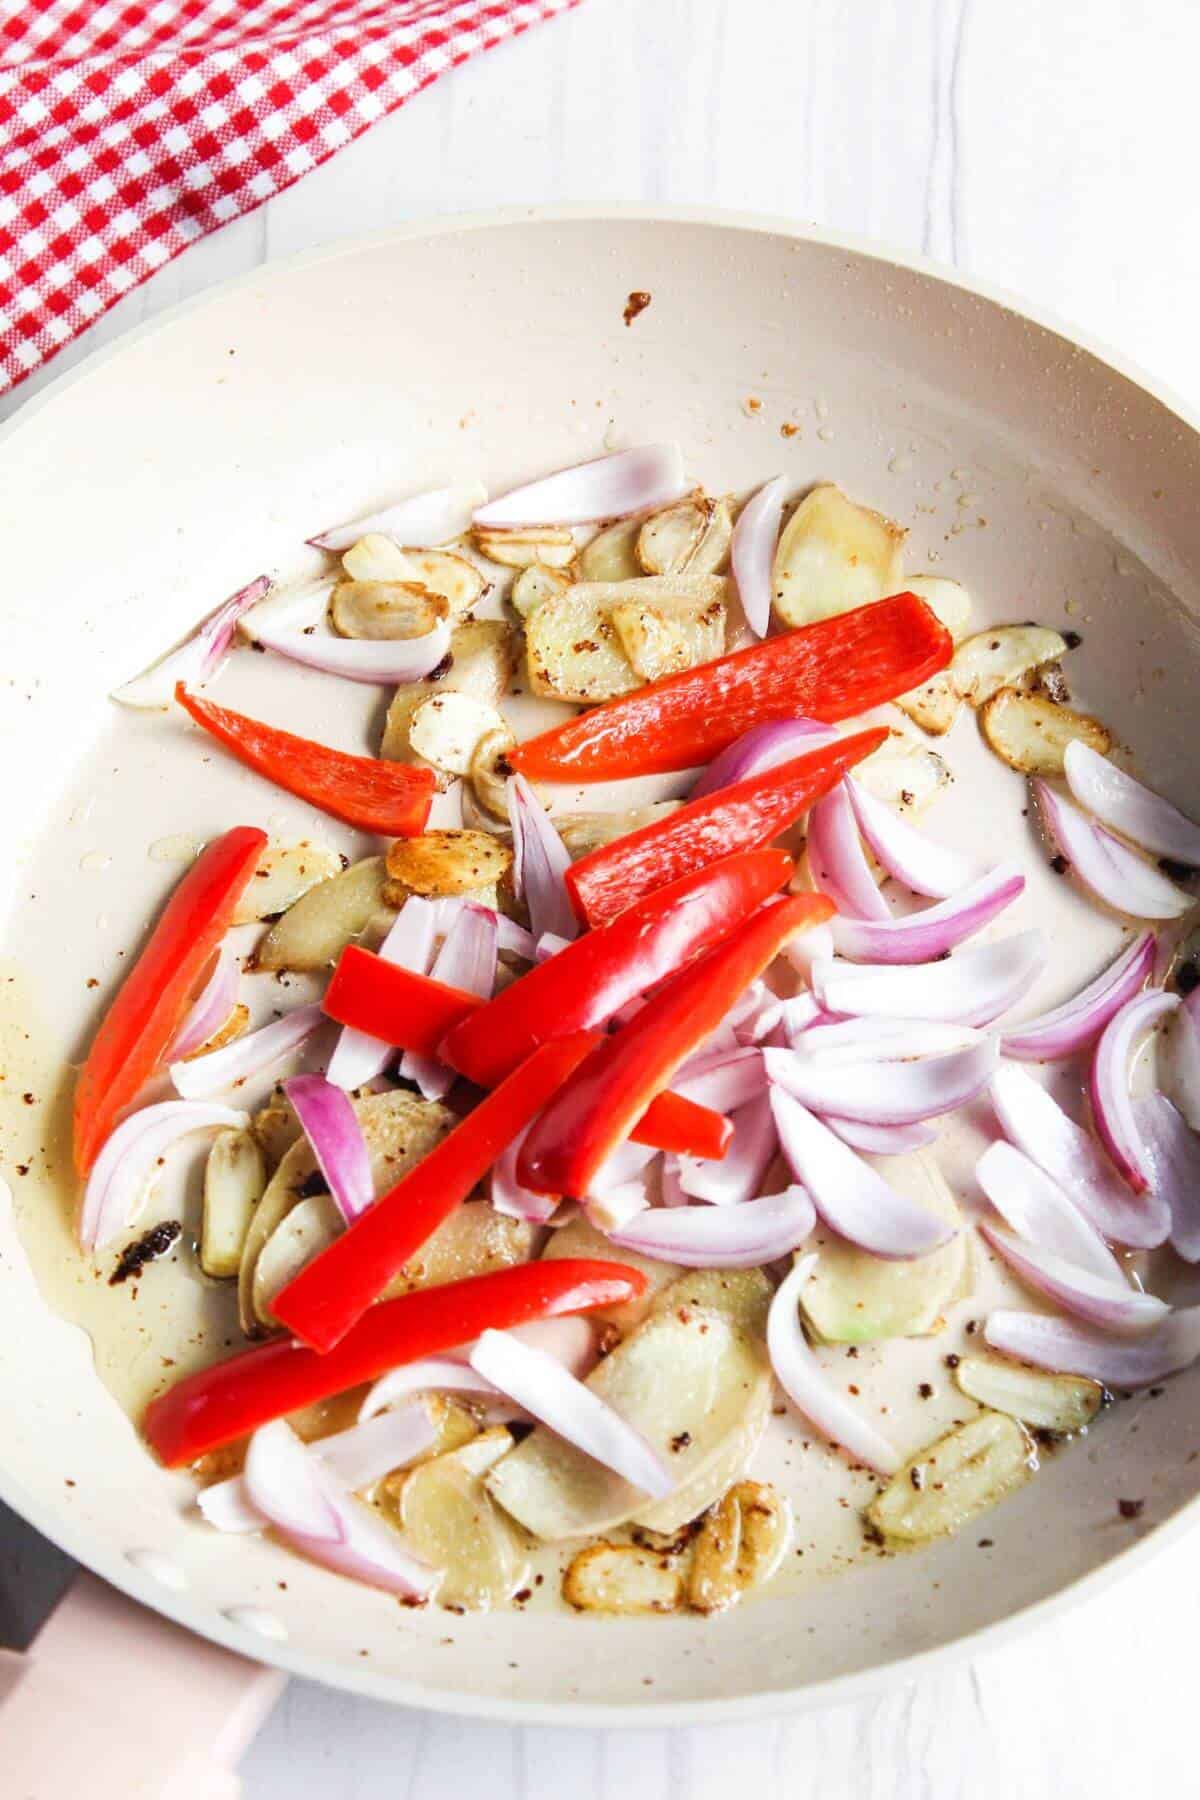 Cooking red bell pepper and onion in skillet.